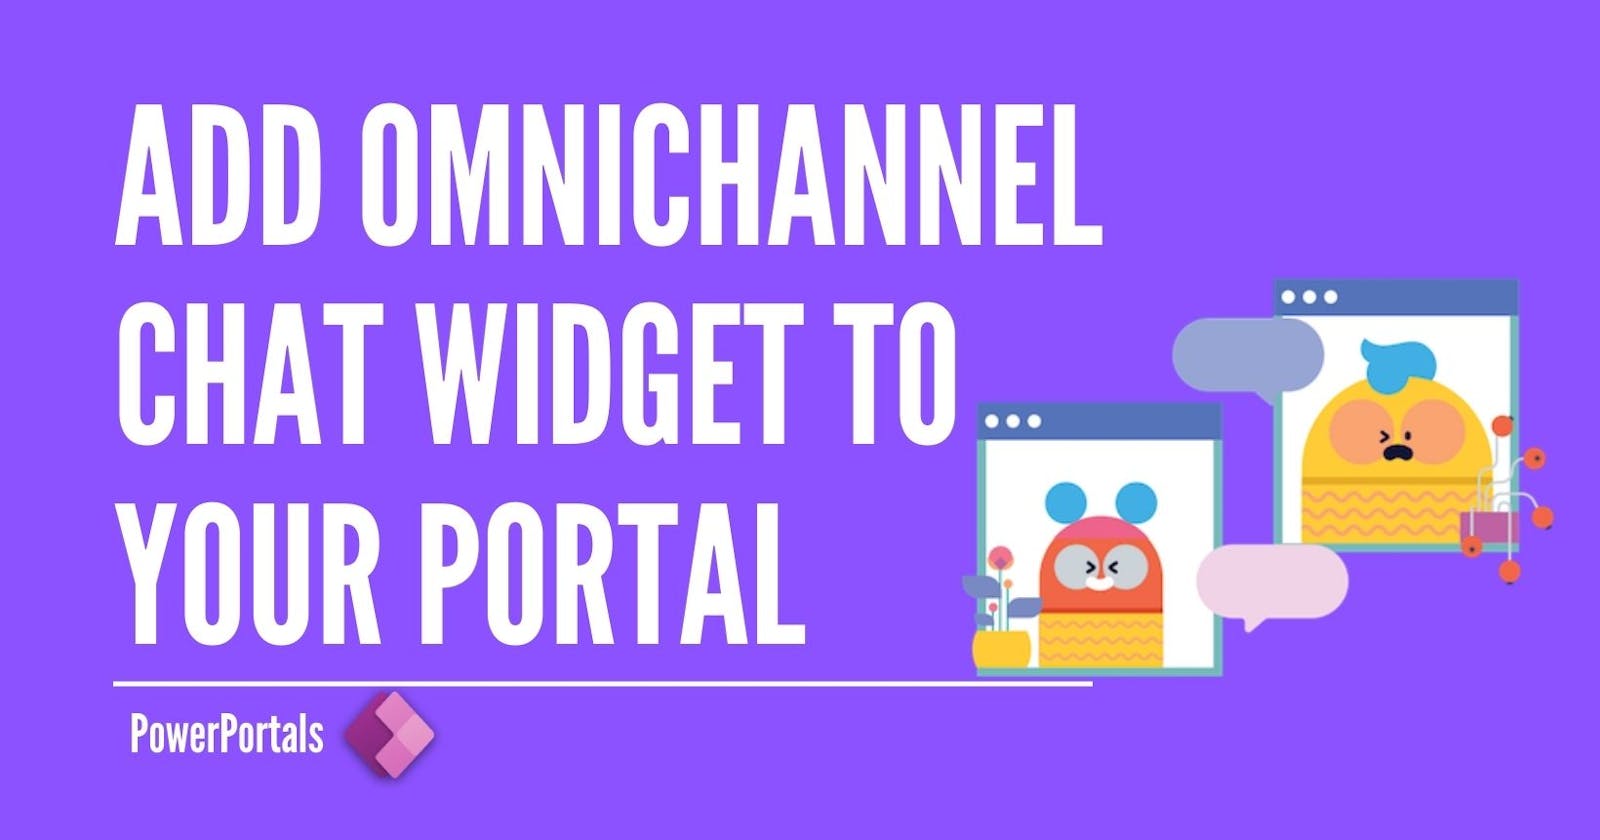 Display Omnichannel chat widget in the footer of your portal